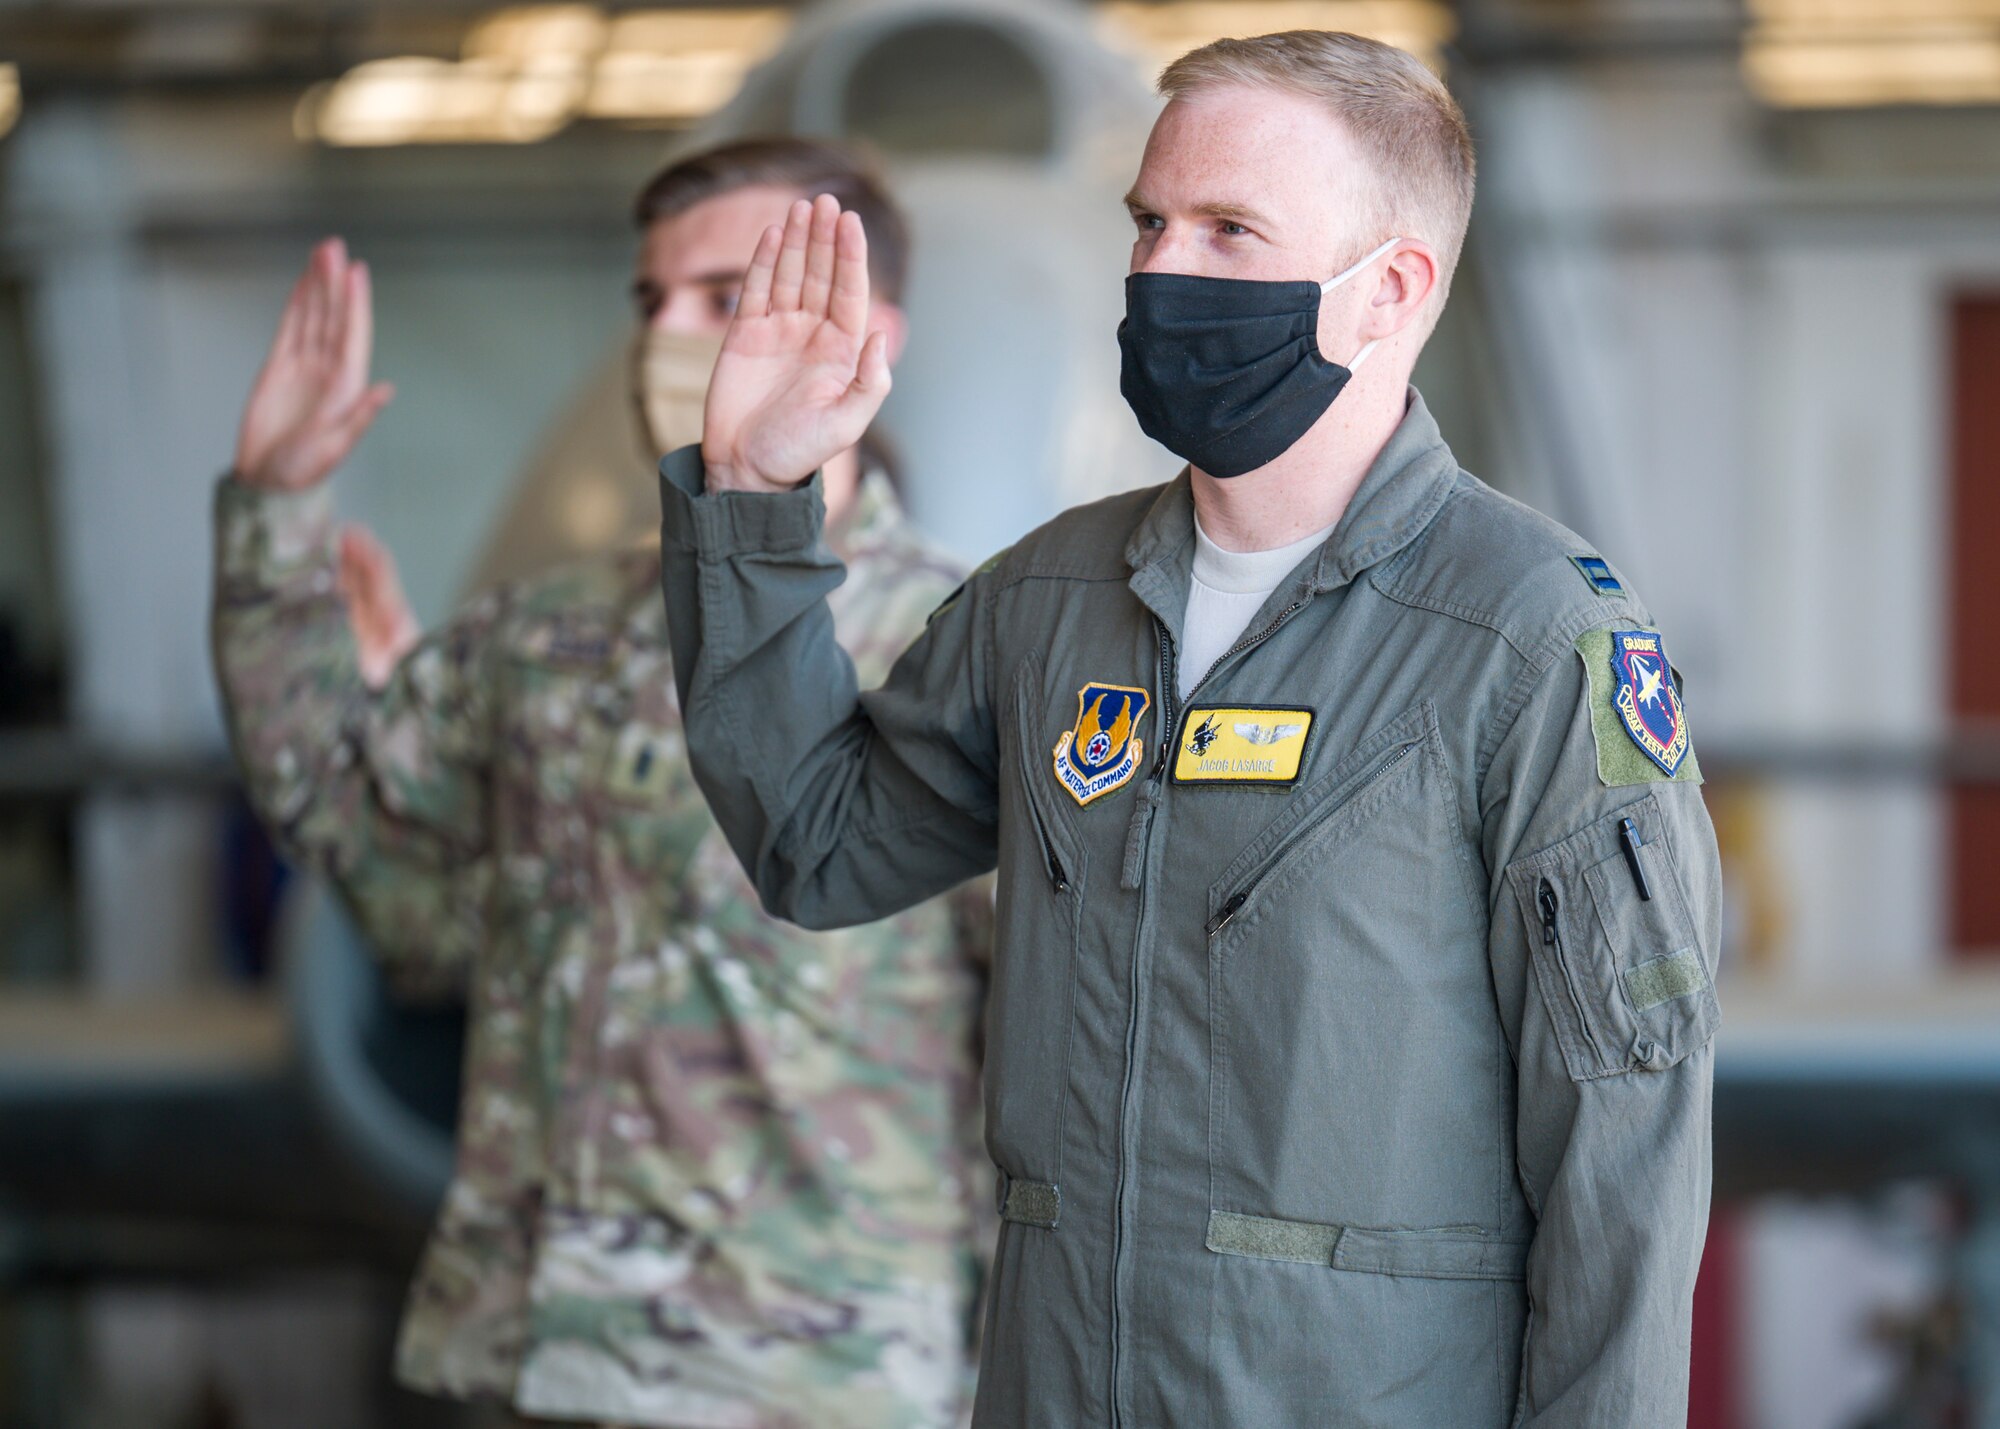 Capt. Jacob LaSarge, 452nd Flight Test Squadron, originally of Byron Center, Michigan, recites the oath of office during a Space Force Transfer Ceremony at Edwards Air Force Base, California, Feb. 11. (Air Force photo by Giancarlo Casem)